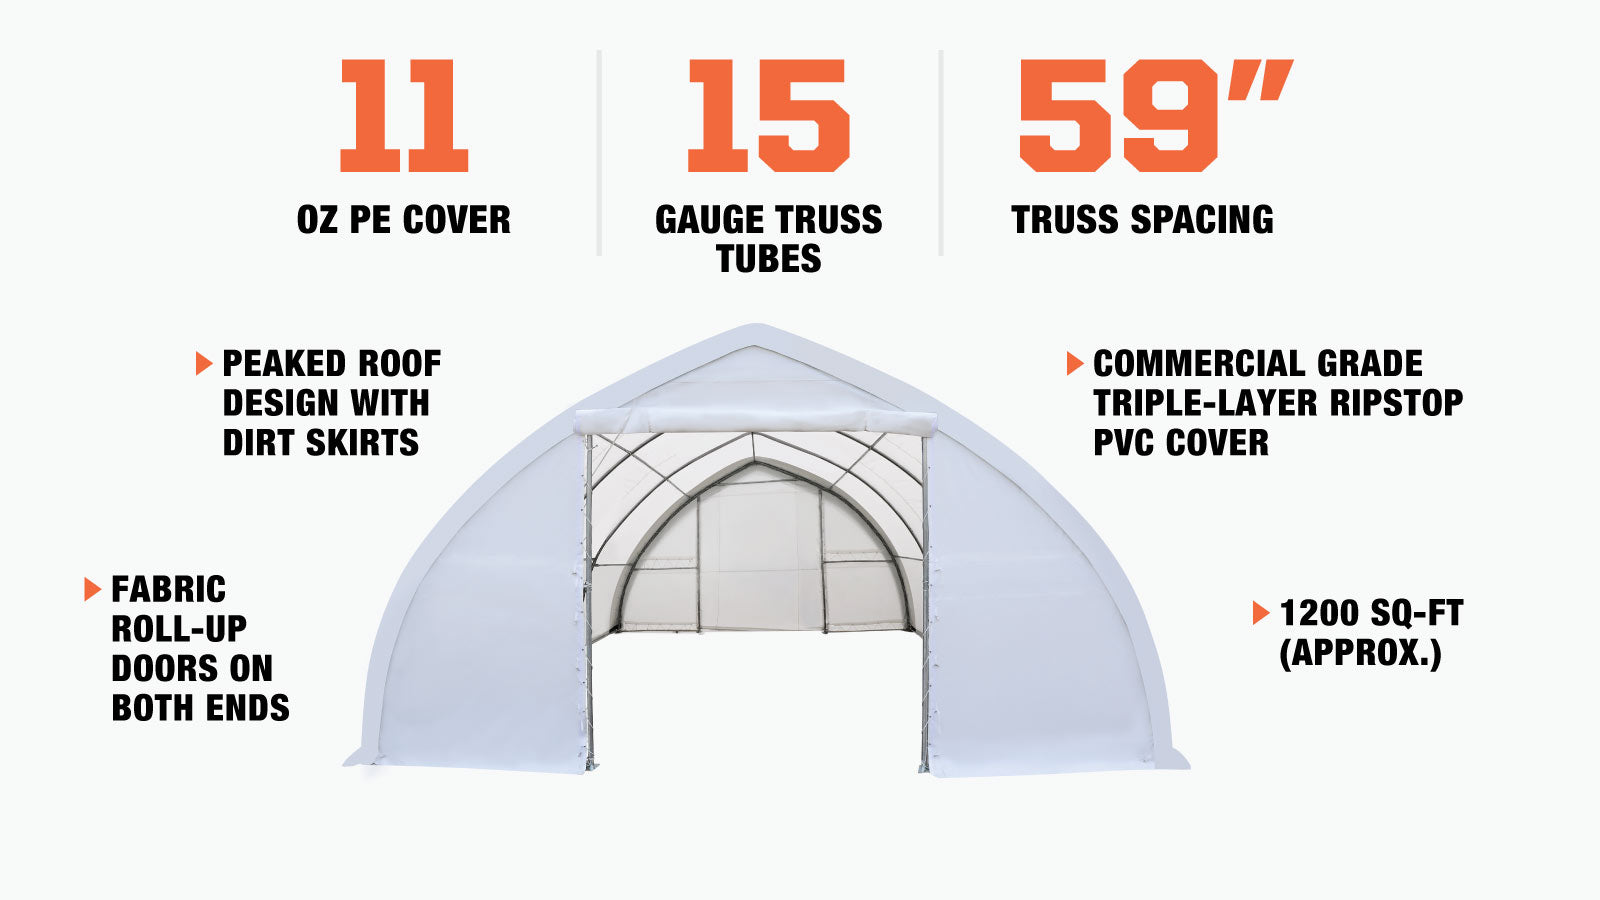 TMG Industrial 30' x 40' Peak Ceiling Storage Shelter with Heavy Duty 11 oz PE Cover & Drive Through Doors, TMG-ST3040E (Previously ST3040)-description-image